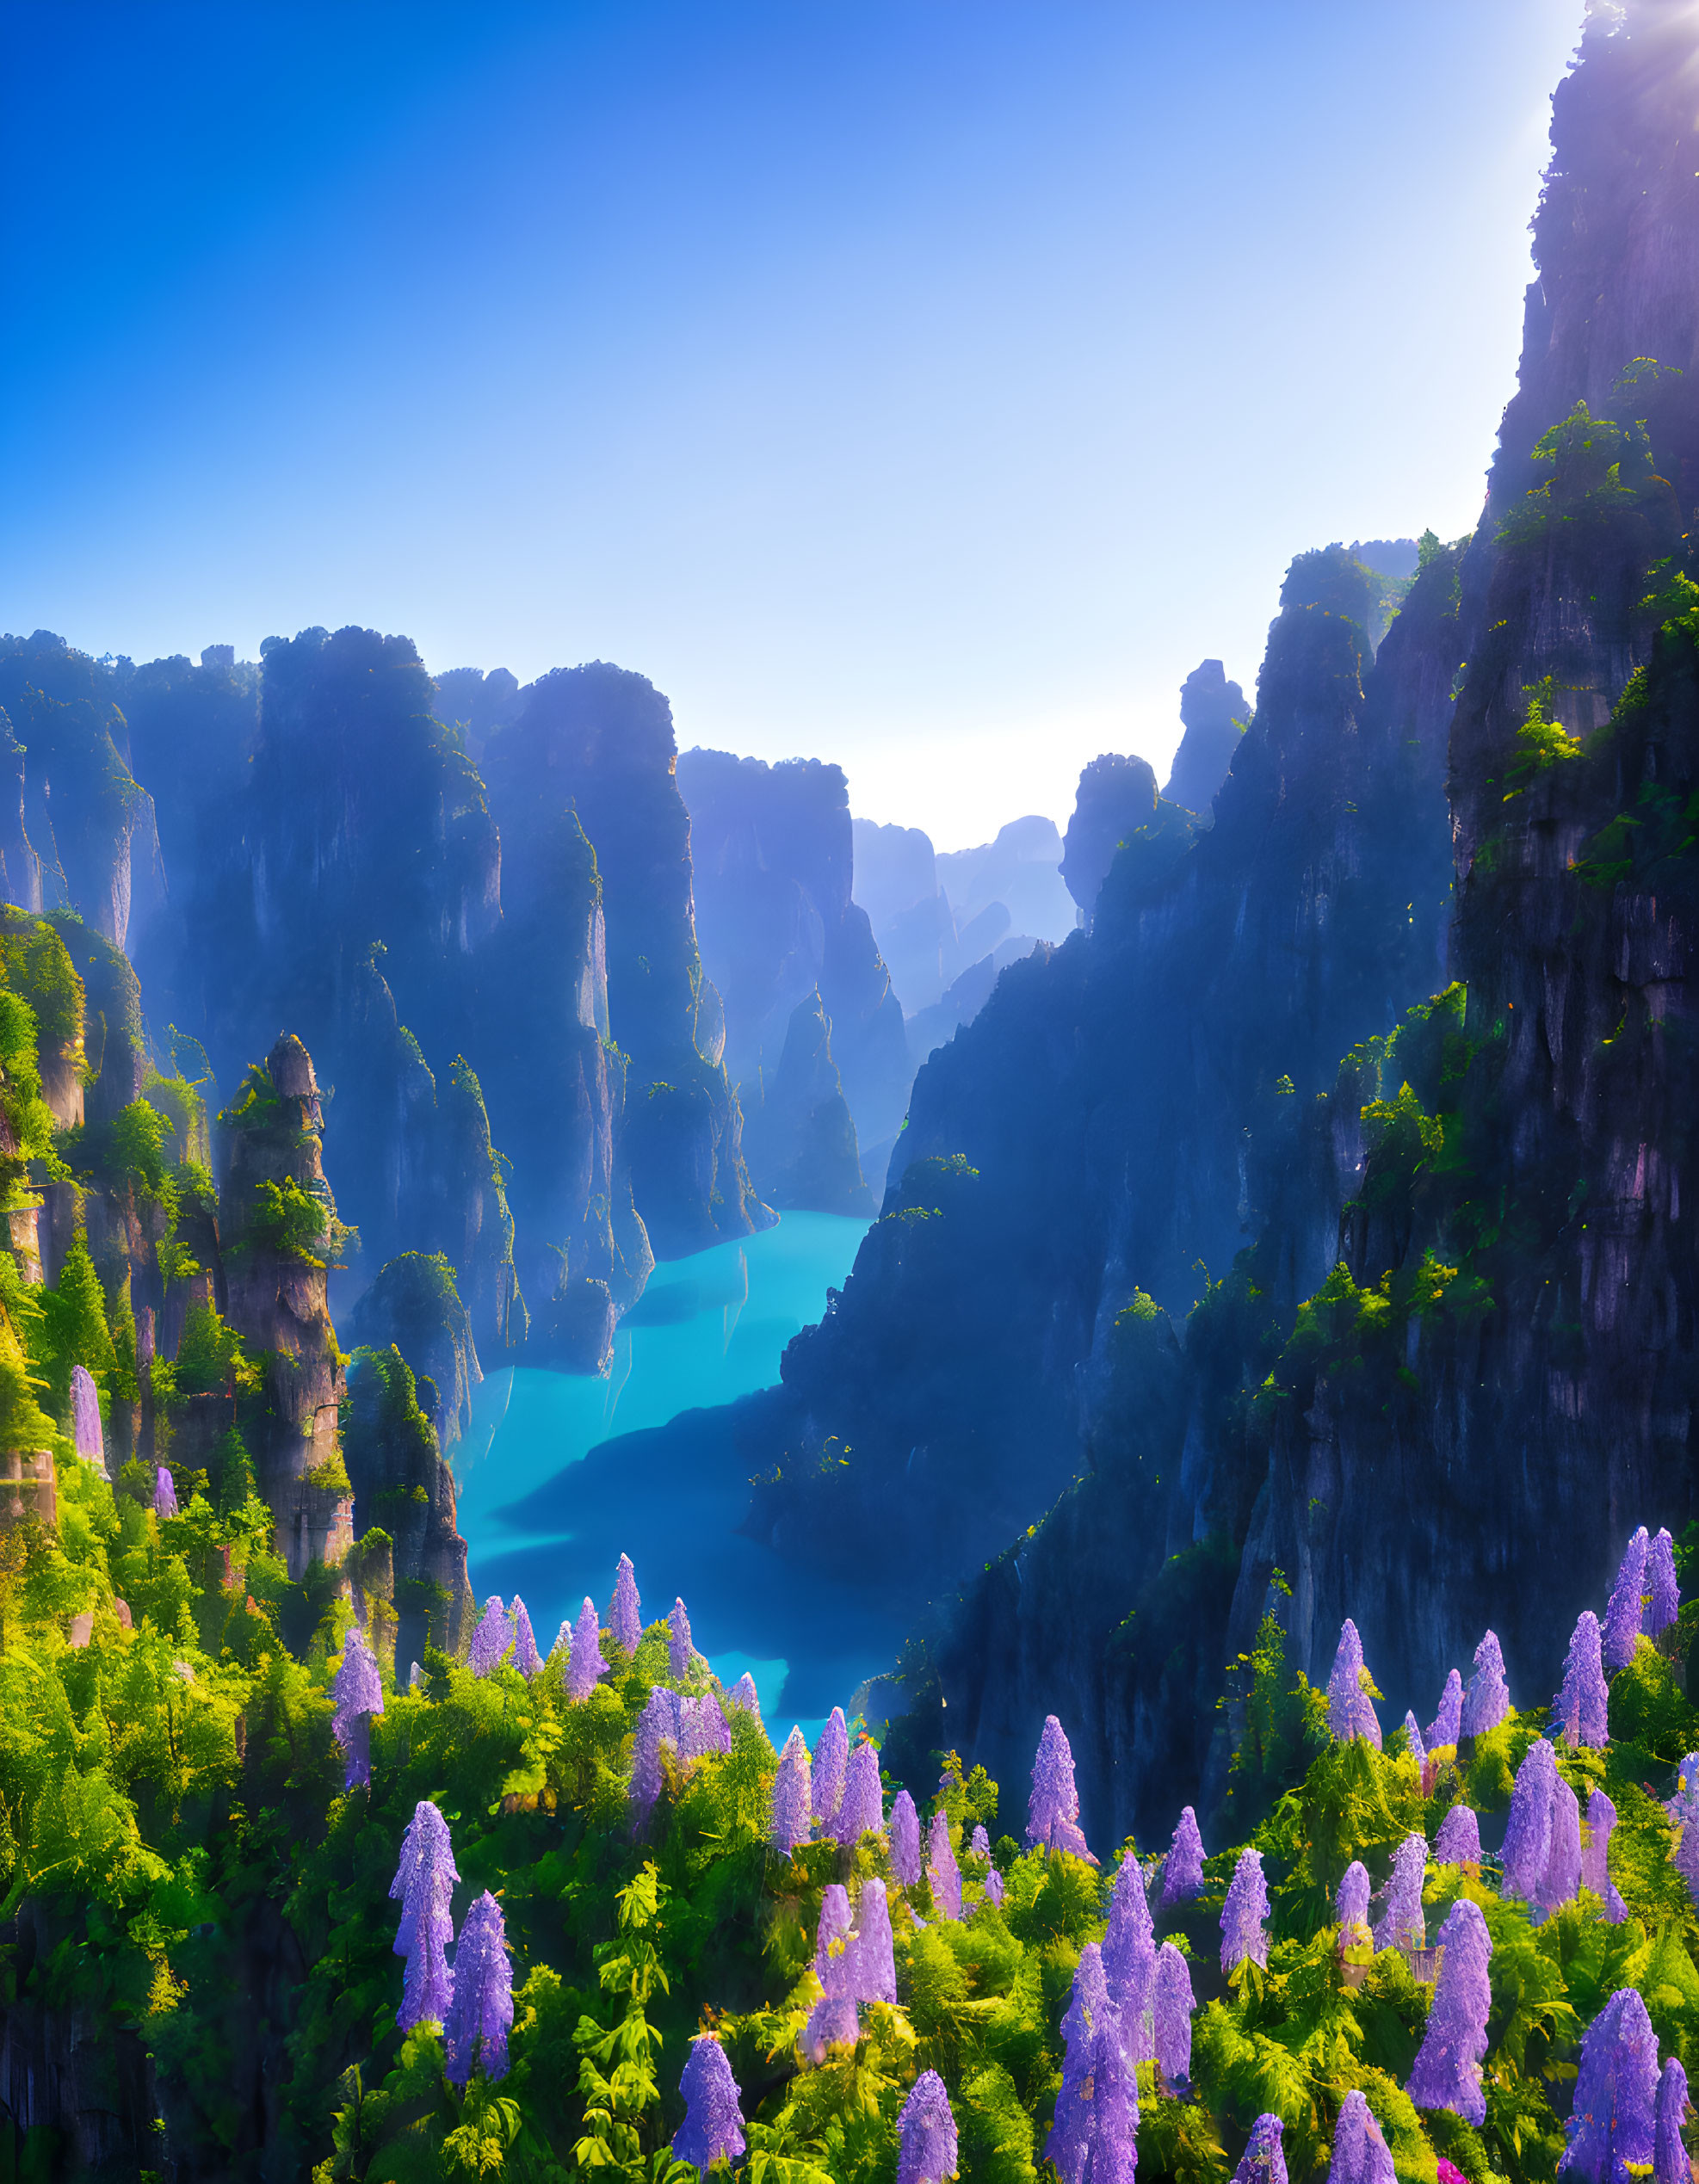 Tranquil landscape with limestone cliffs, lush greenery, turquoise river, and purple flowers